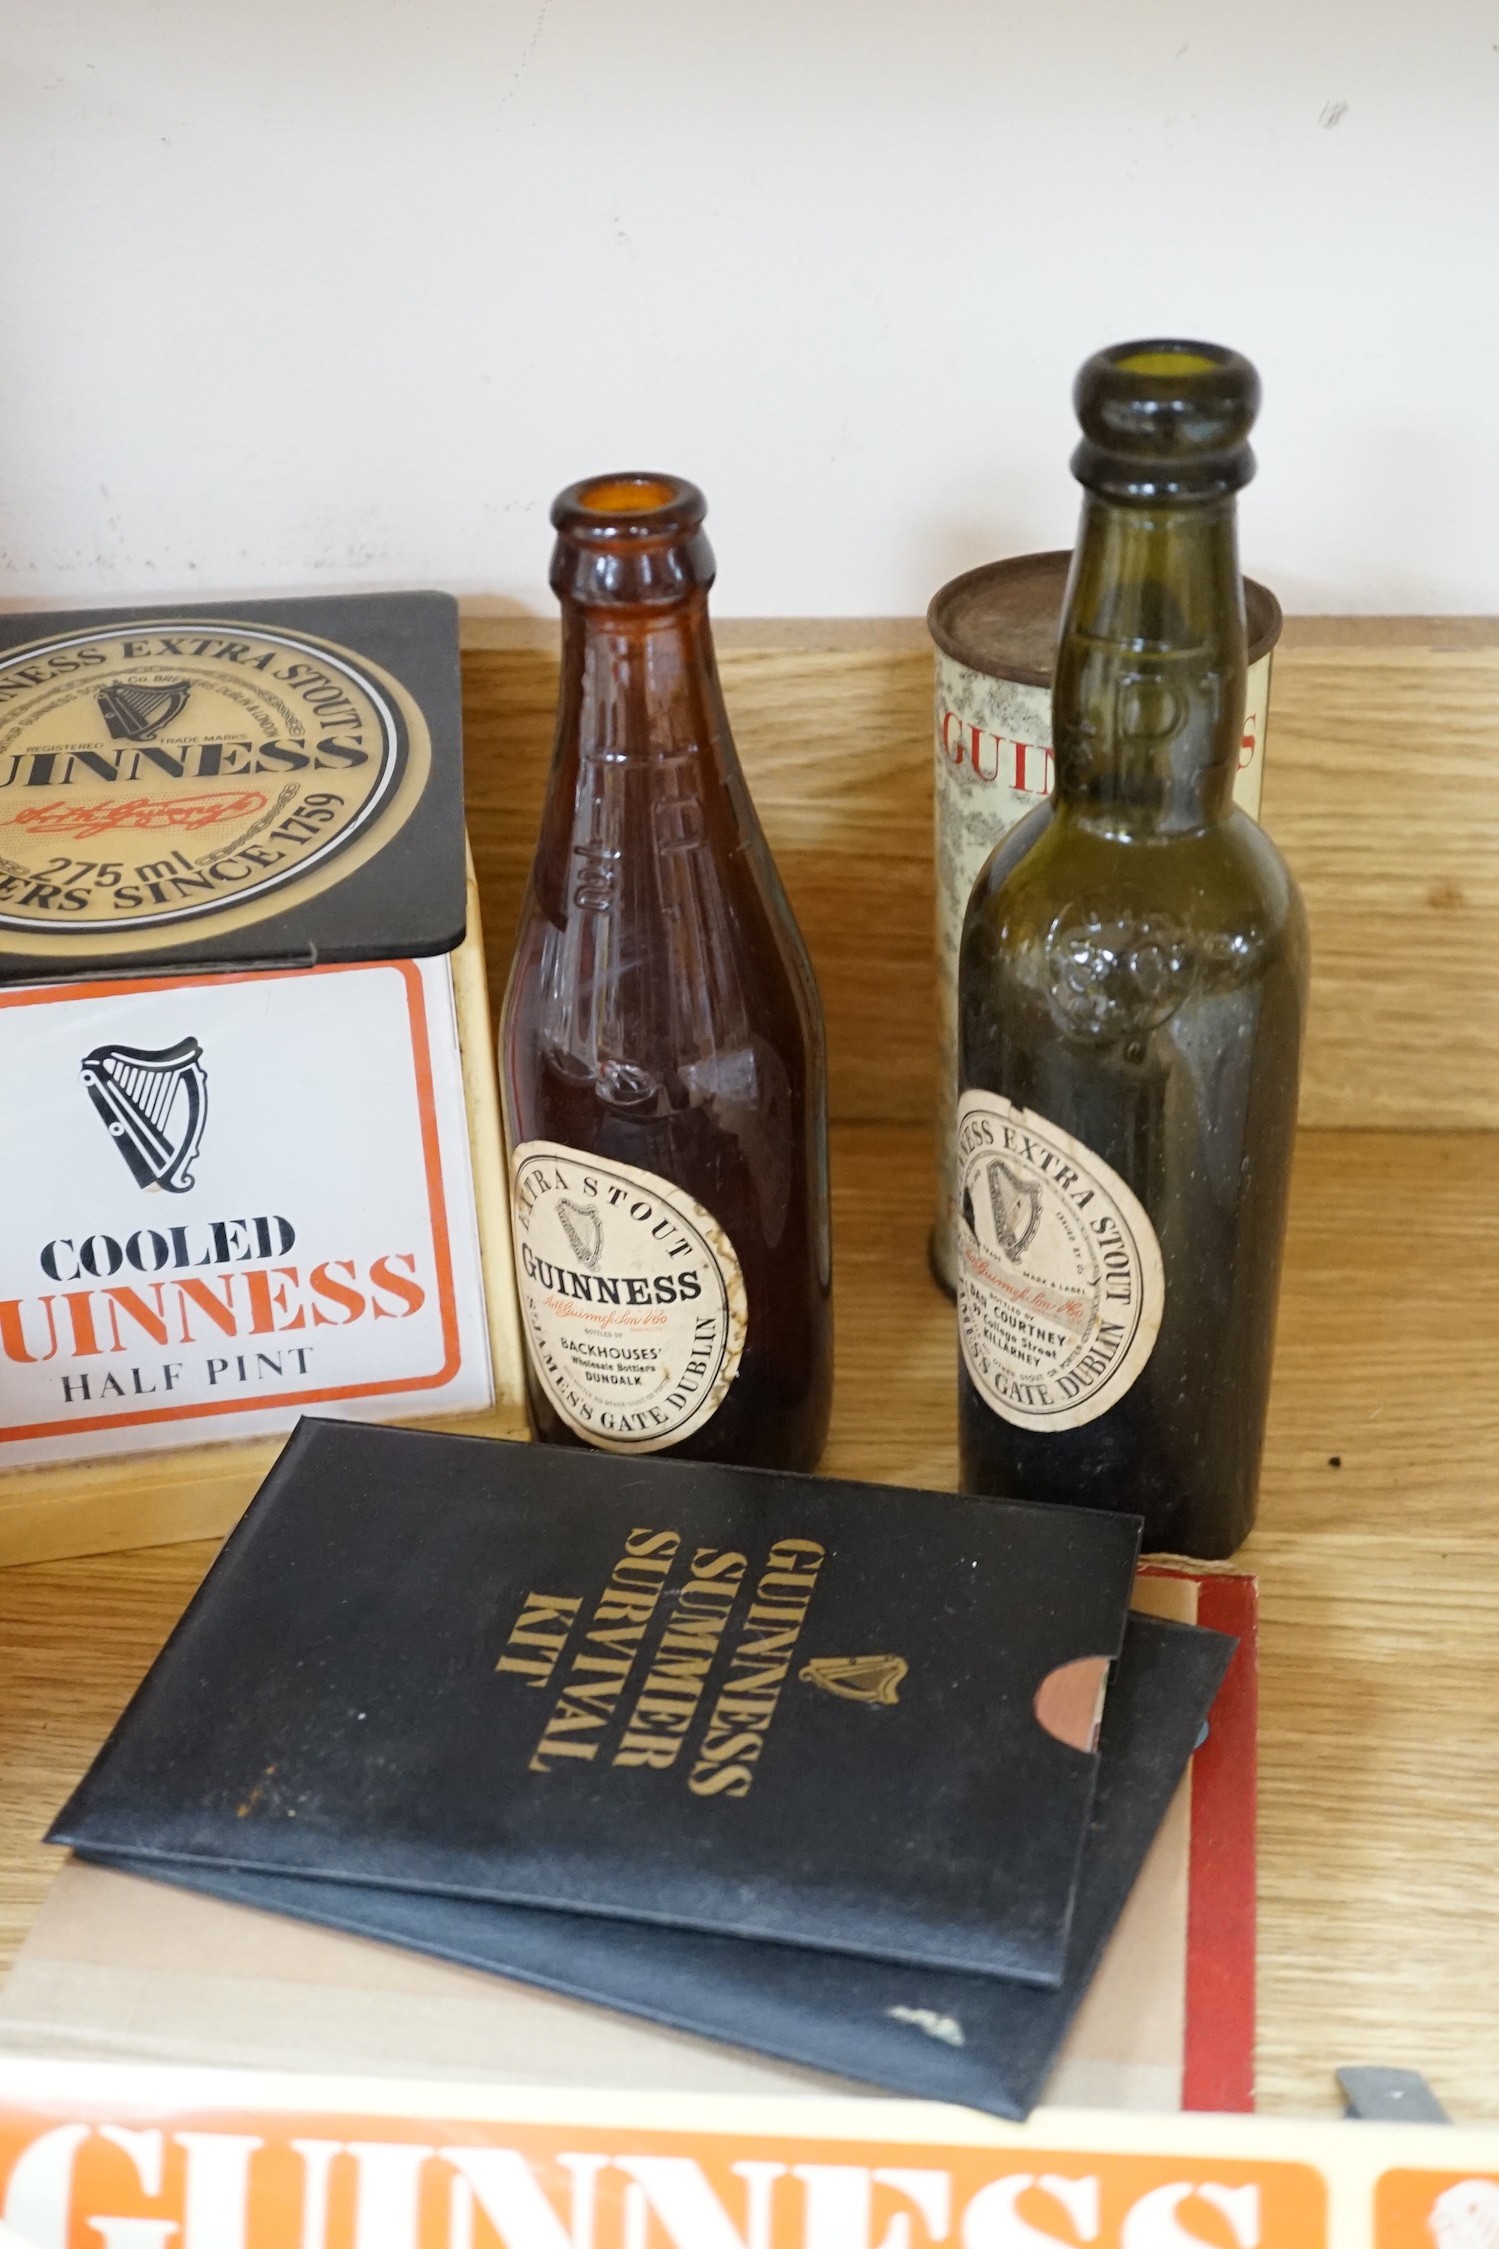 A large quantity Guinness advertising material, including a table lamp with Guinness shade, signage, bar mats, camera etc